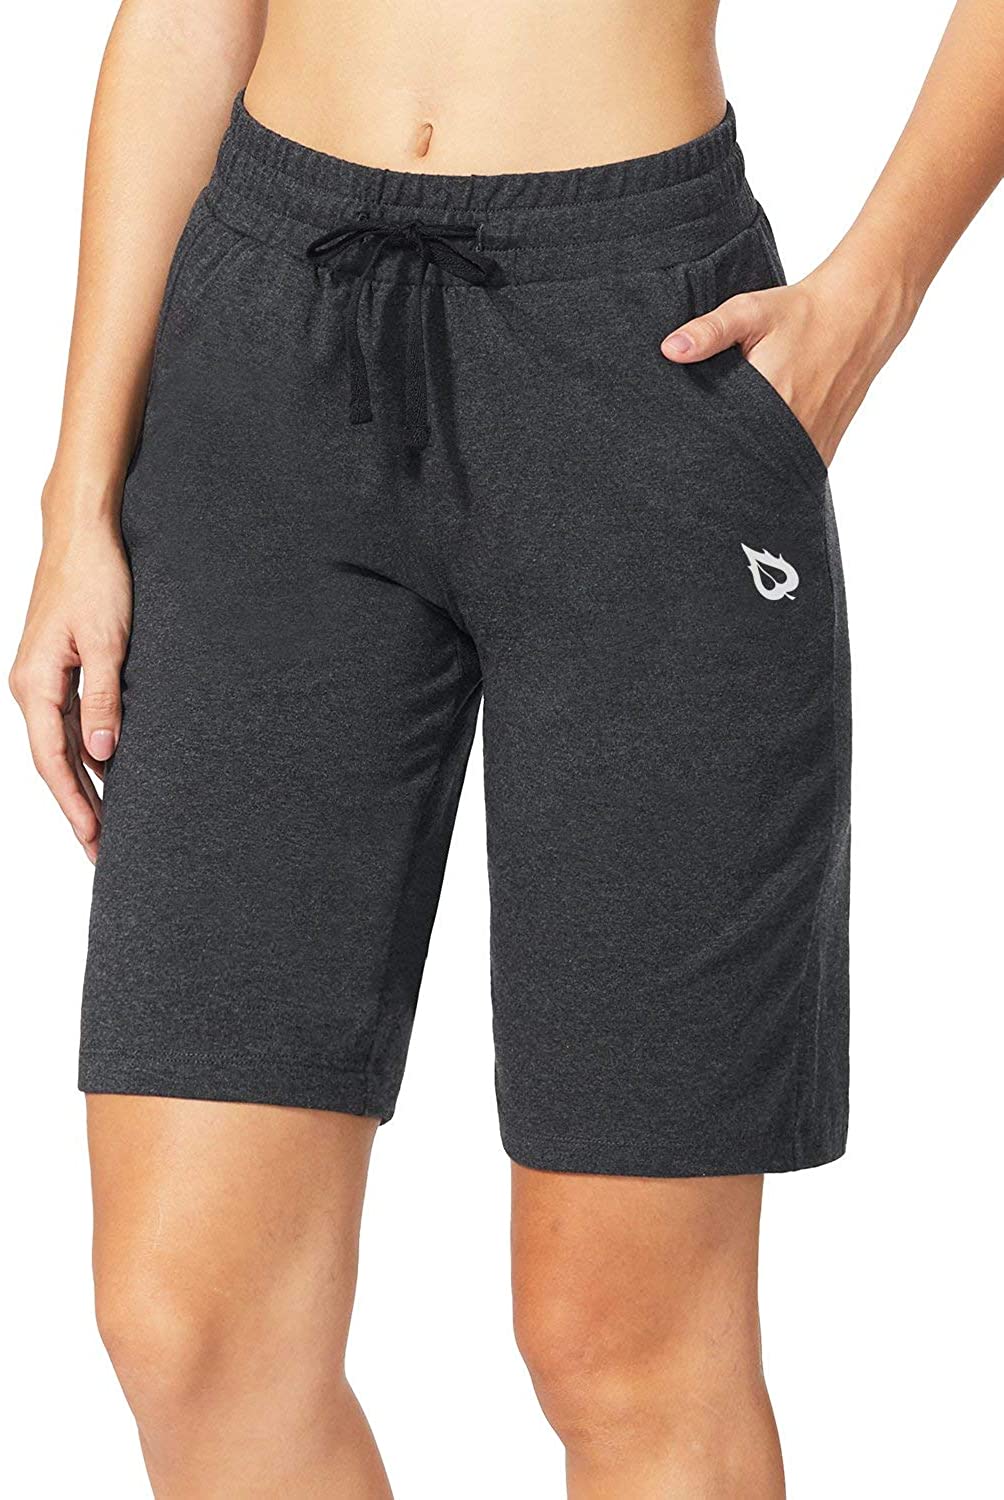 BALEAF Women's Bermuda Shorts Long Cotton Jersey with Pockets Athletic  Sweat Wal